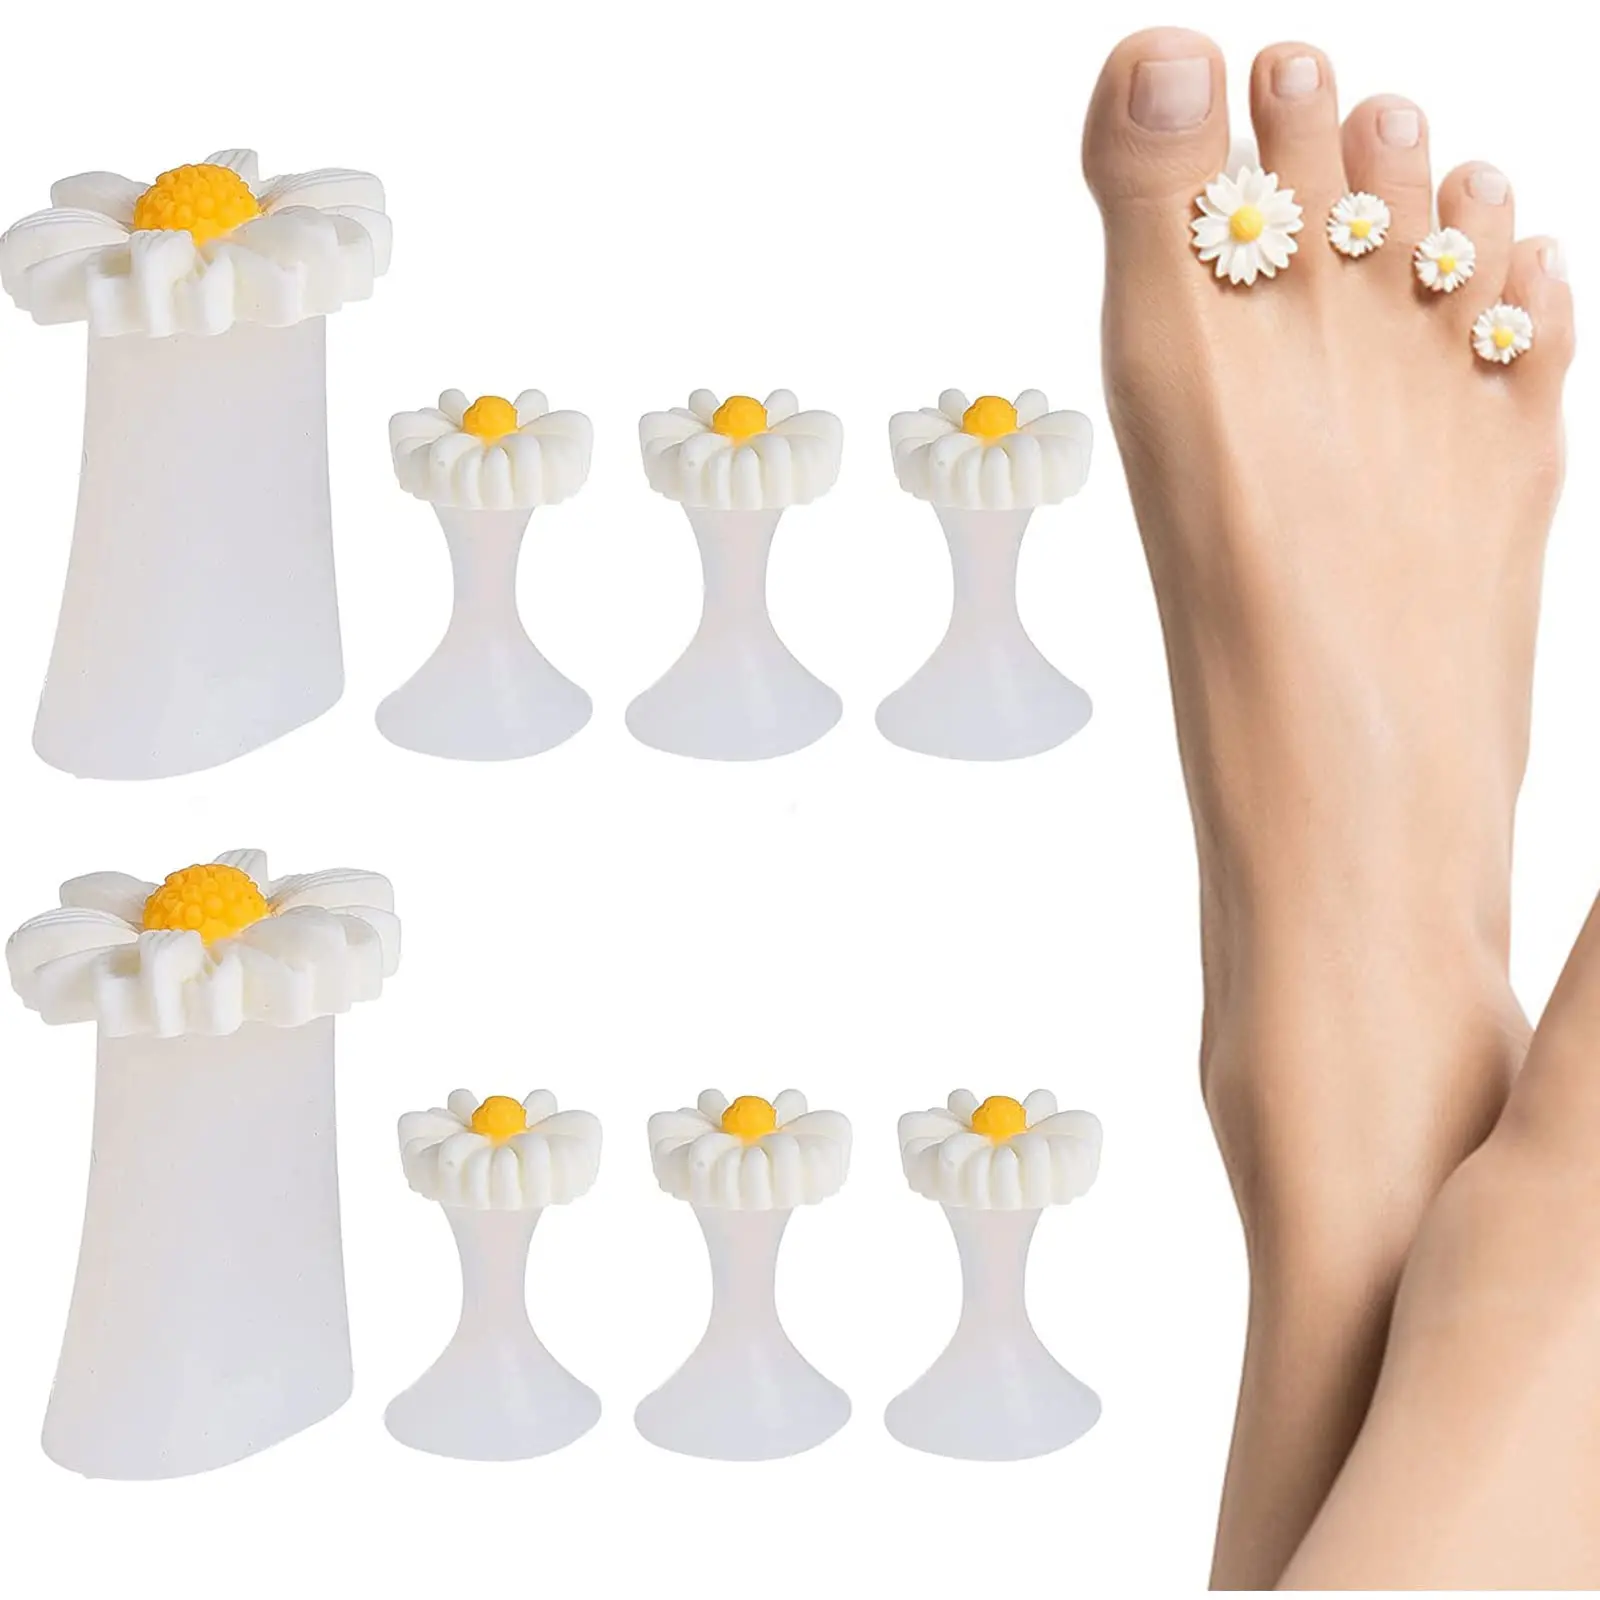 

Silicone Toe Separator Cute Daisy Flower Toe Spacers Cushions Reusable Toes Dividers for Nail Art Pedicure DIY Tools 8 Pack